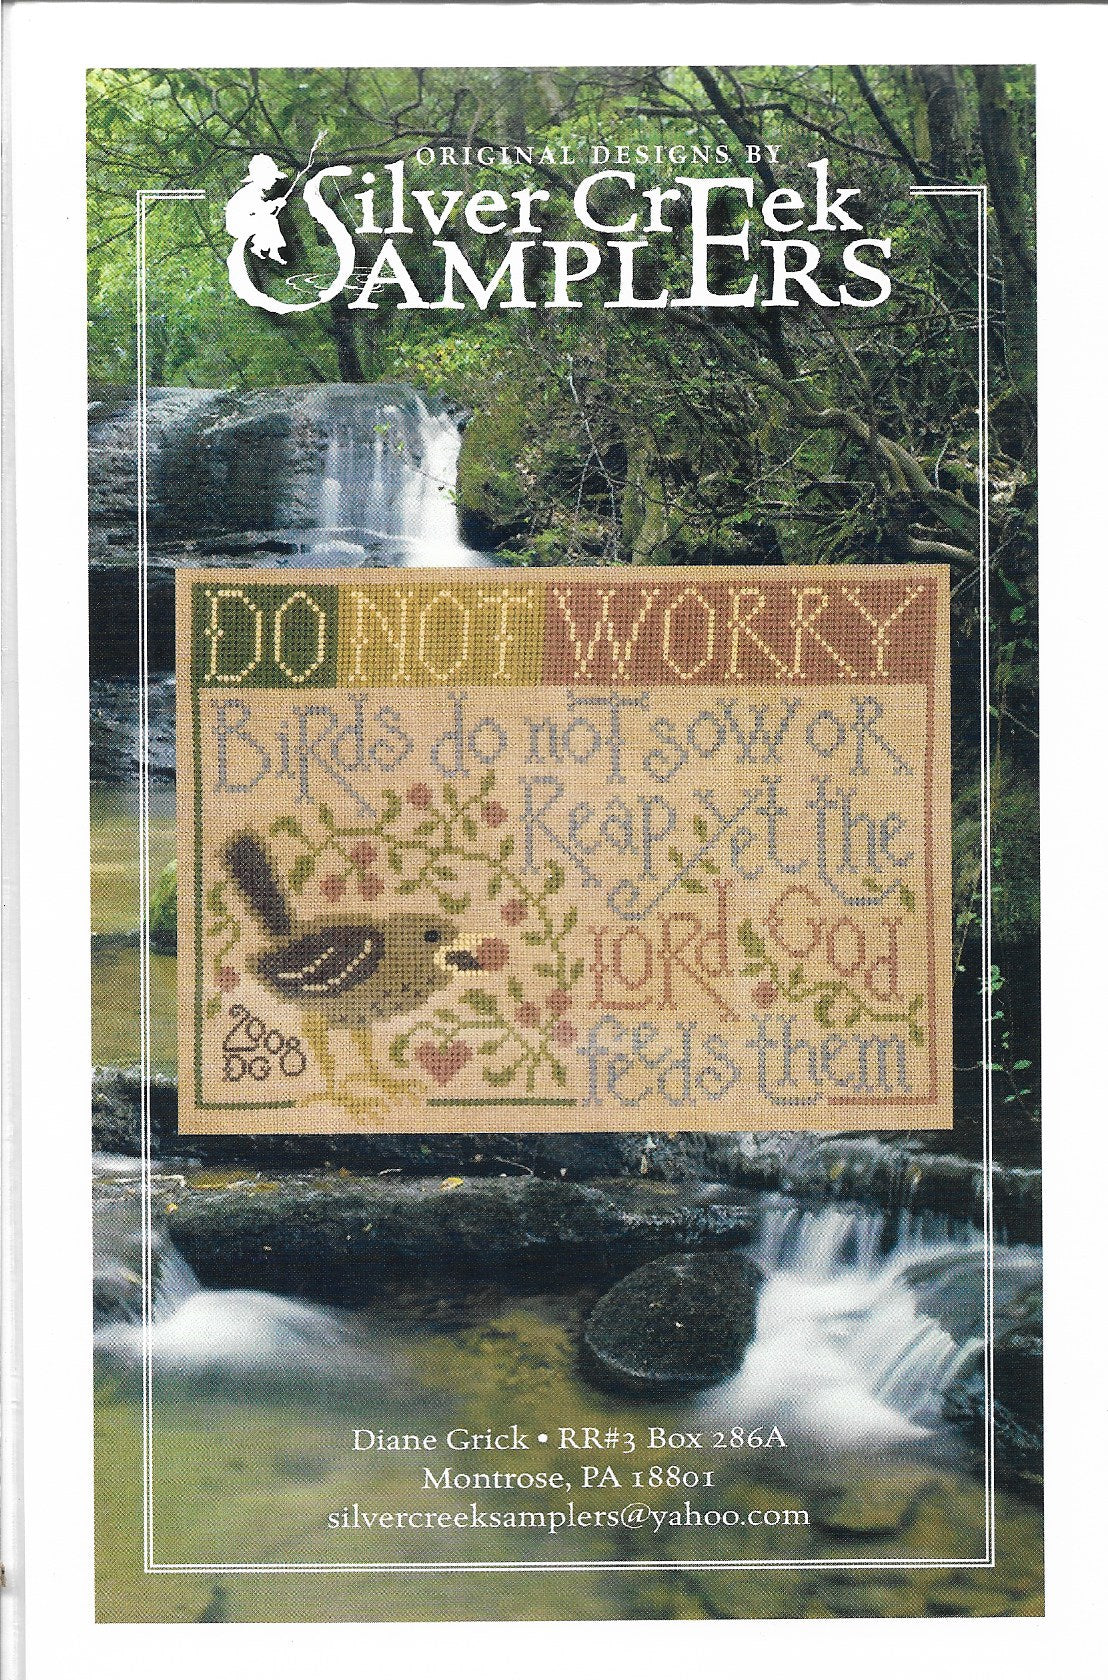 Silver Creek Samplers Eye of the sparrow religious cross stitch pattern